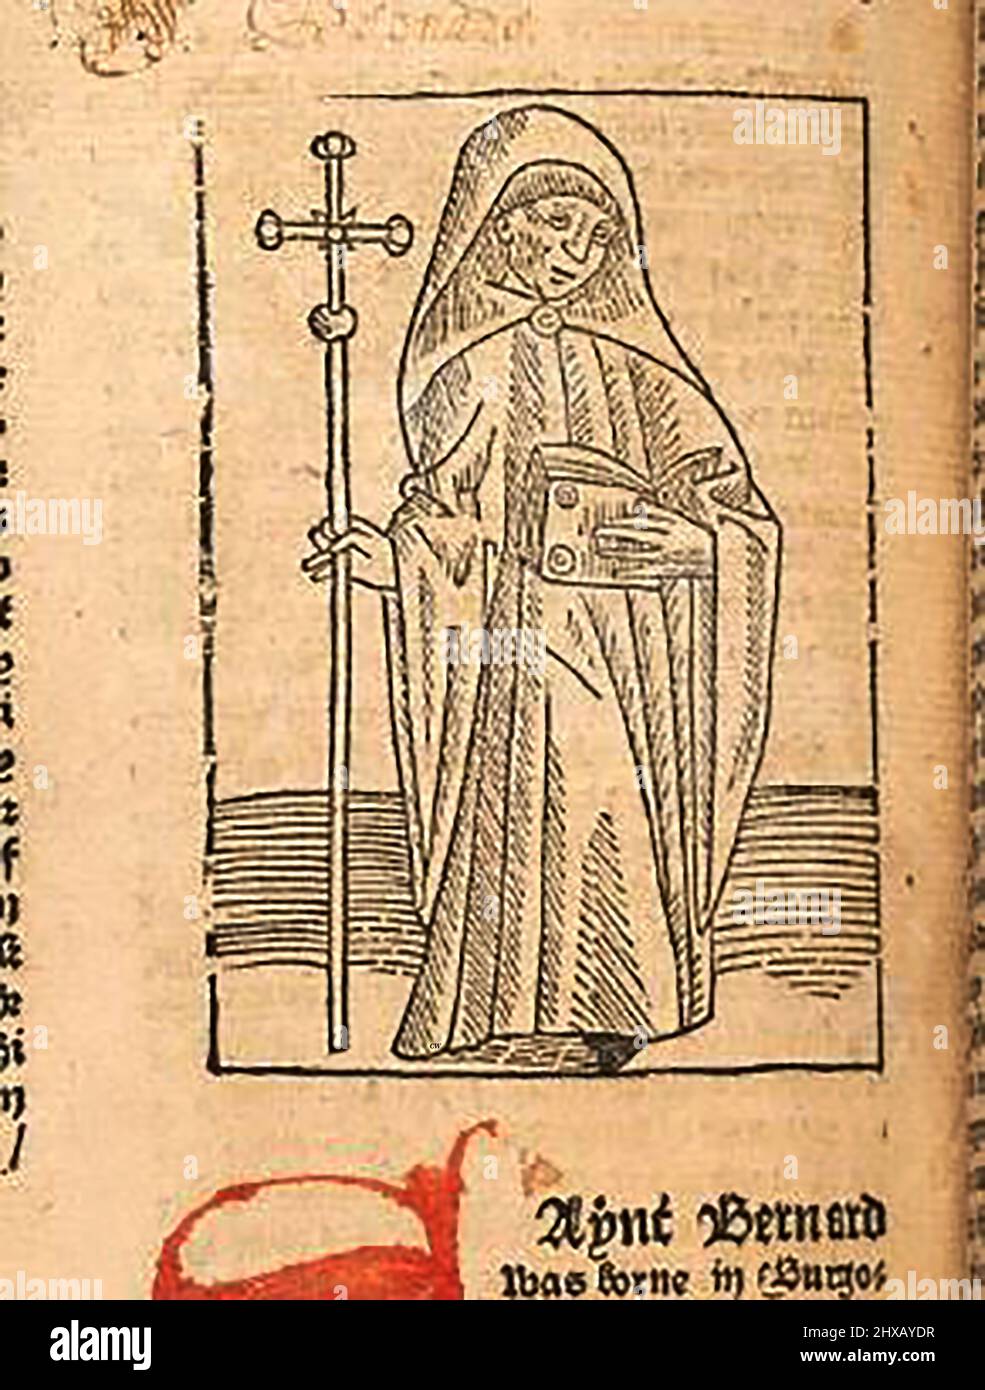 15th century woodcut showing Saint Bernard,  as printed by William Caxton ( 1422-1491/92) in his translation of  'The Golden Legend' or  'Thus endeth the legende named in Latyn legenda aurea that is to saye in Englysshe the golden legende' by Jacobus, de Voragine, (Circa 1229-1298). Stock Photo